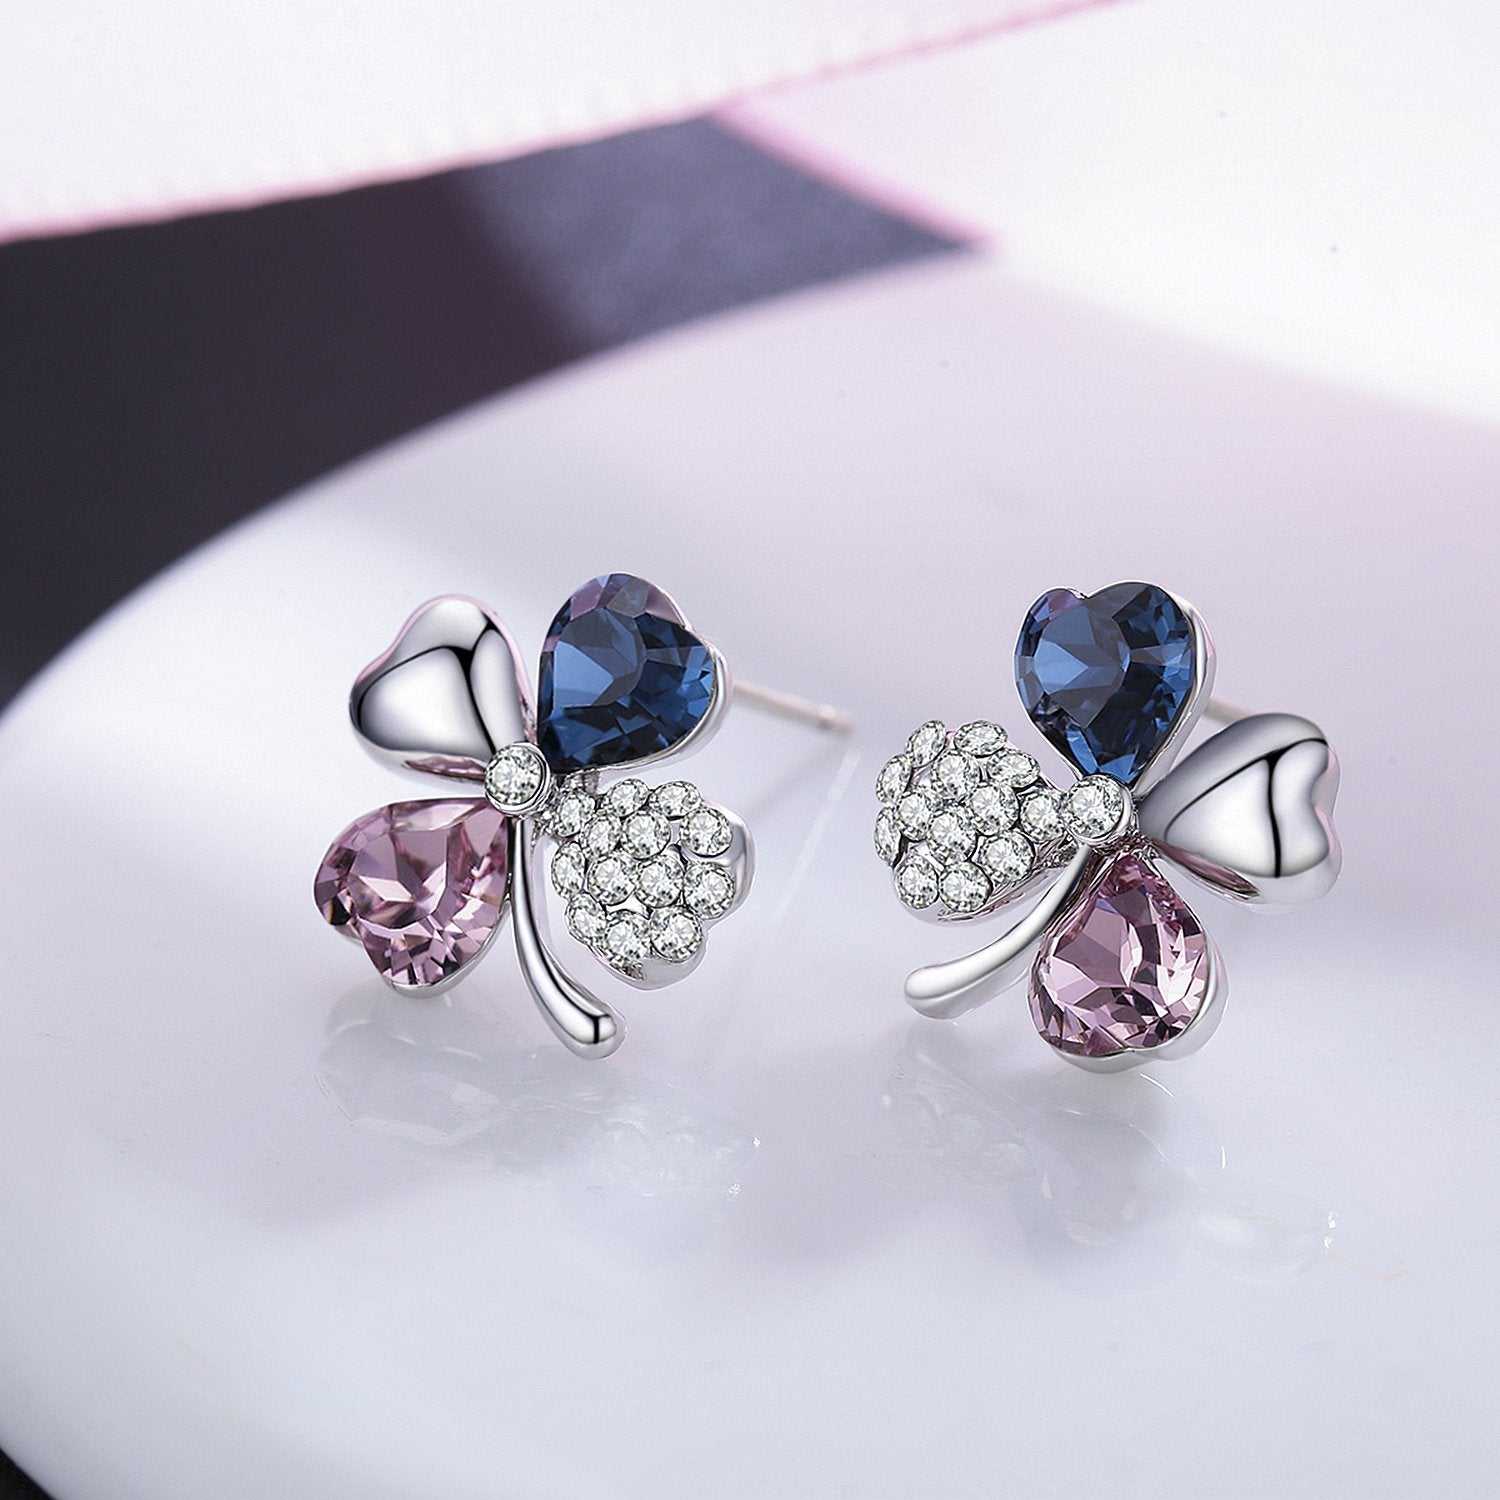 Sterling Silver Crystal Flower Stud Earrings Made With Swarovski Elements